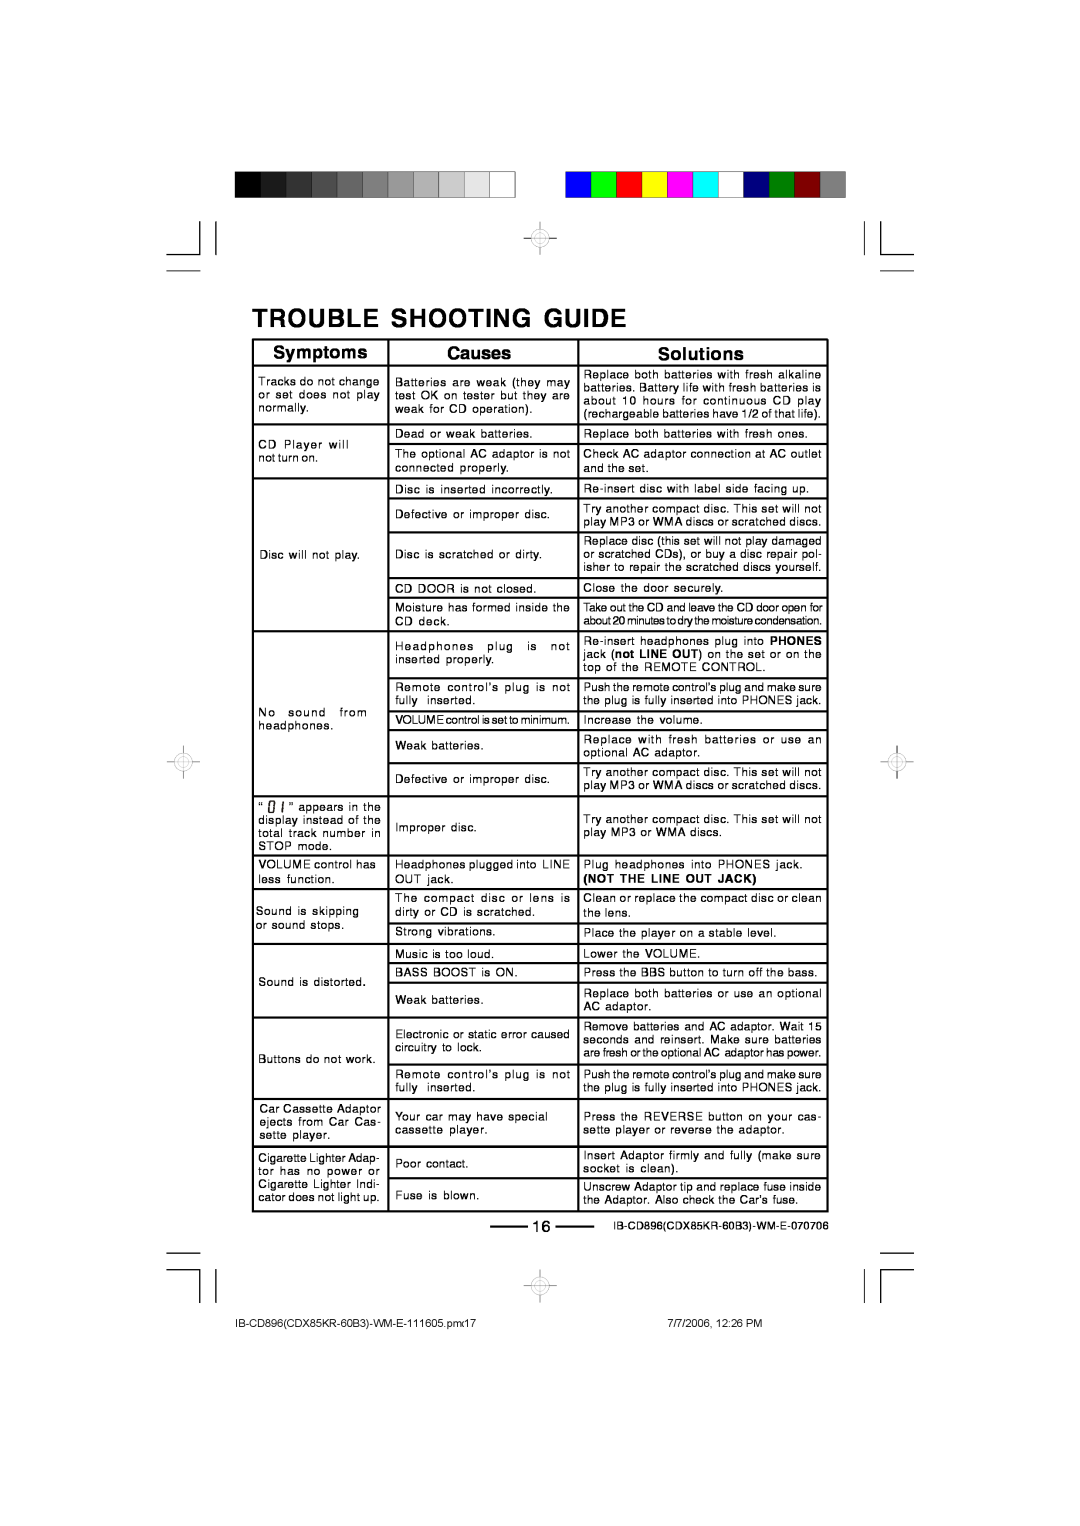 Lenoxx Electronics CD-896 operating instructions Trouble Shooting Guide, Symptoms, Causes, Solutions, Not The Line Out Jack 